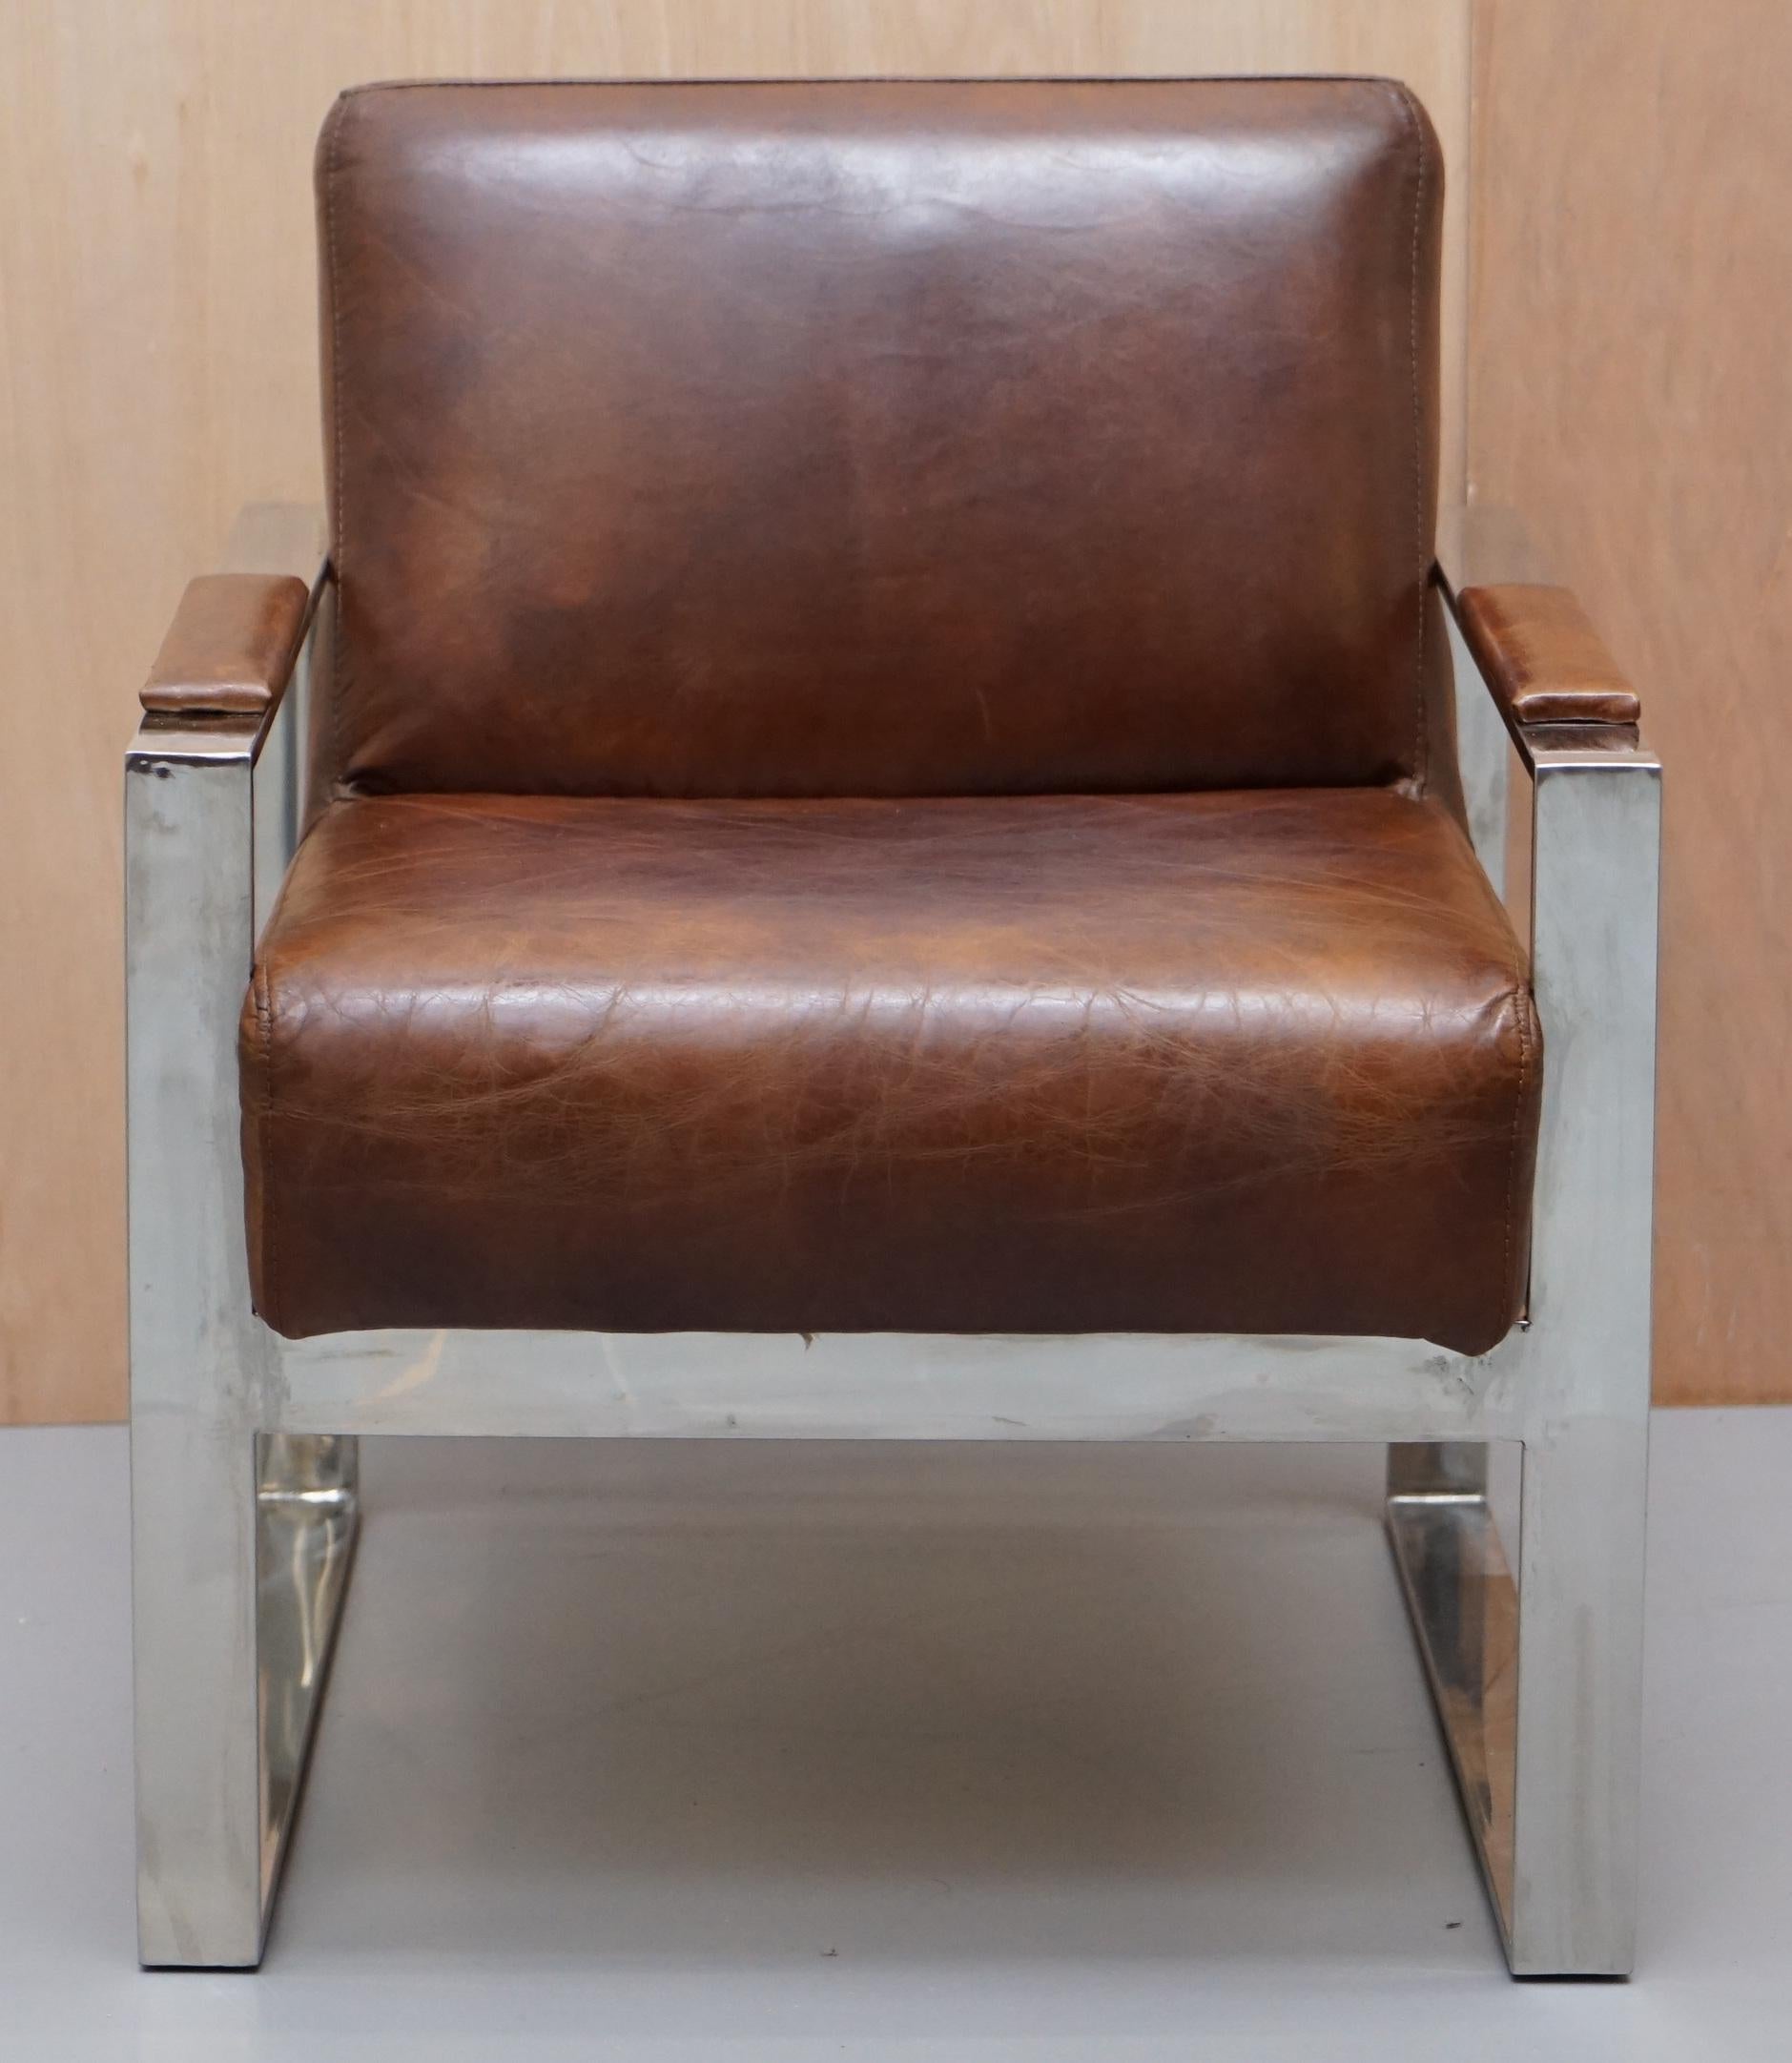 We are delighted to offer for sale this stunning solid chrome and vintage heritage brown leather armchair for occasional or office use

A very decorative and well made armchair, Ralph Lauren make this chair however this piece isn’t stamped so I